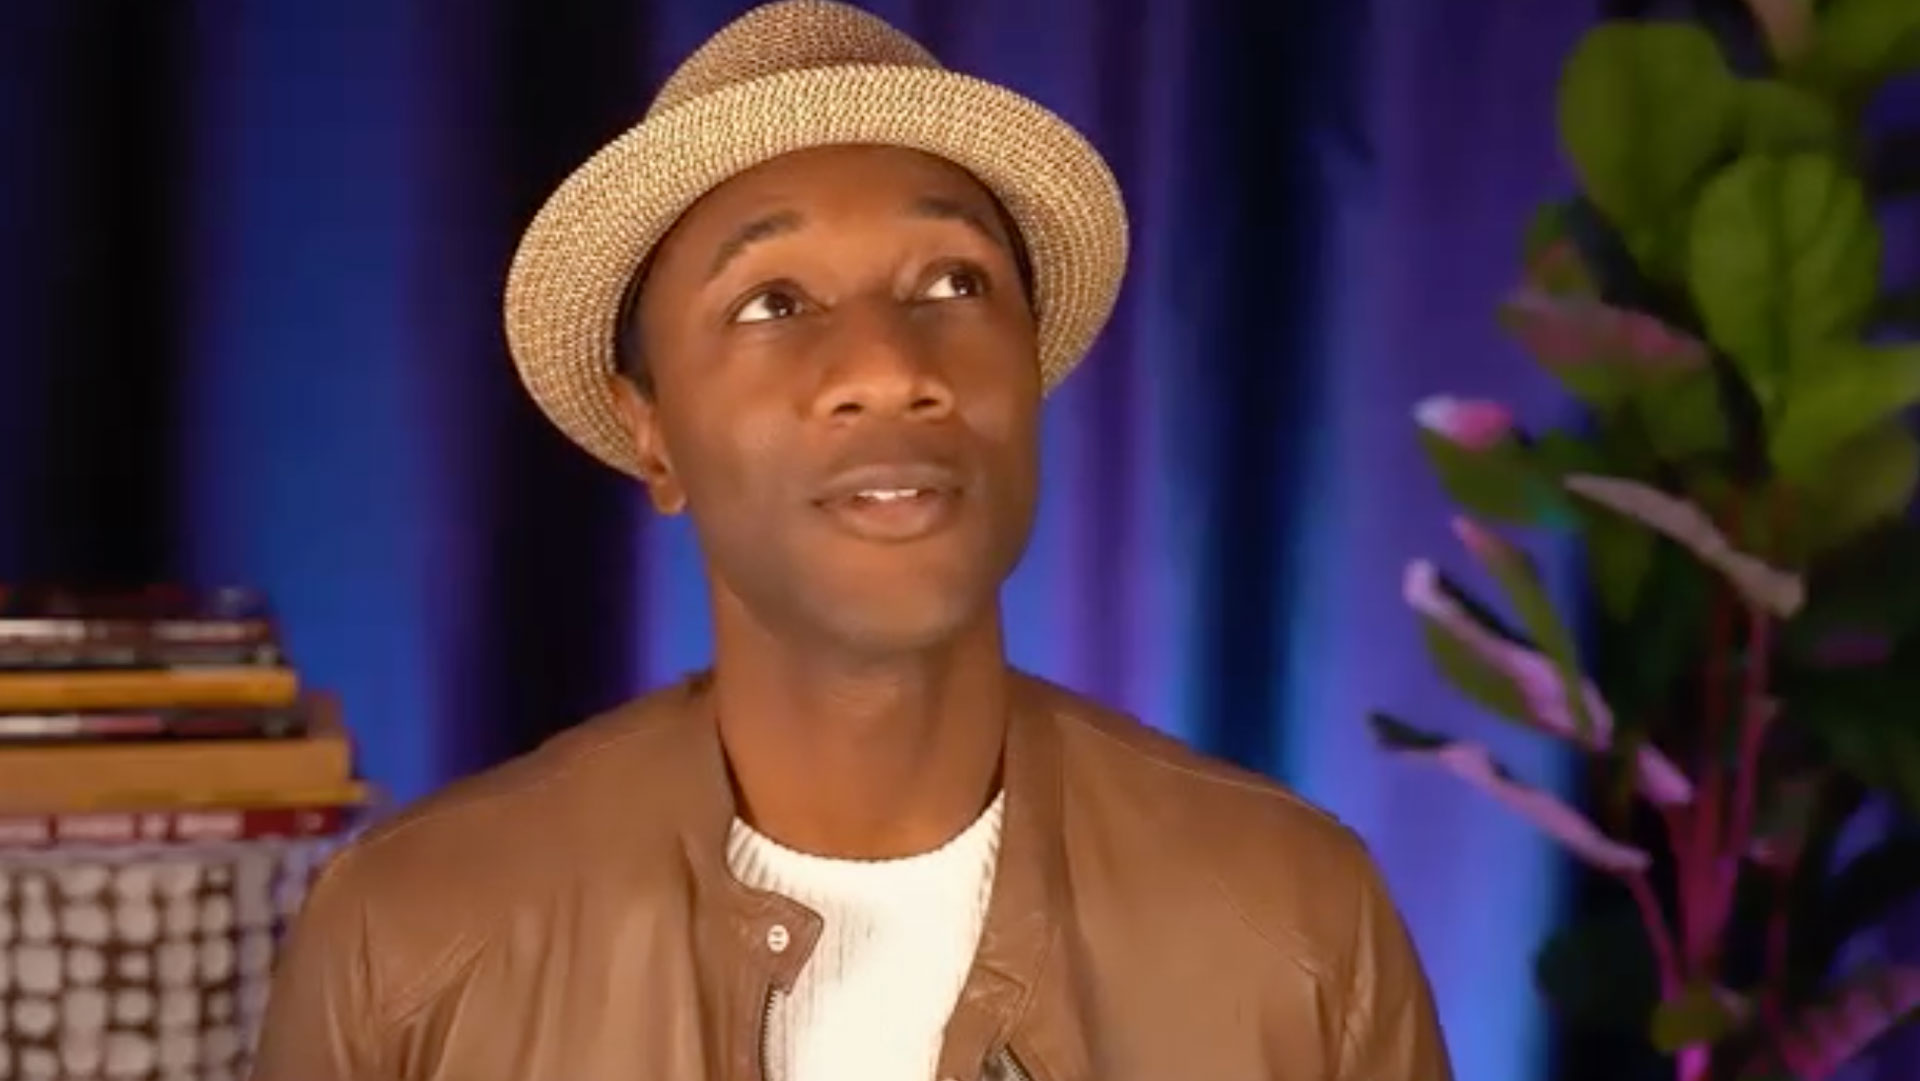 Aloe Blacc on The Music That Made Me